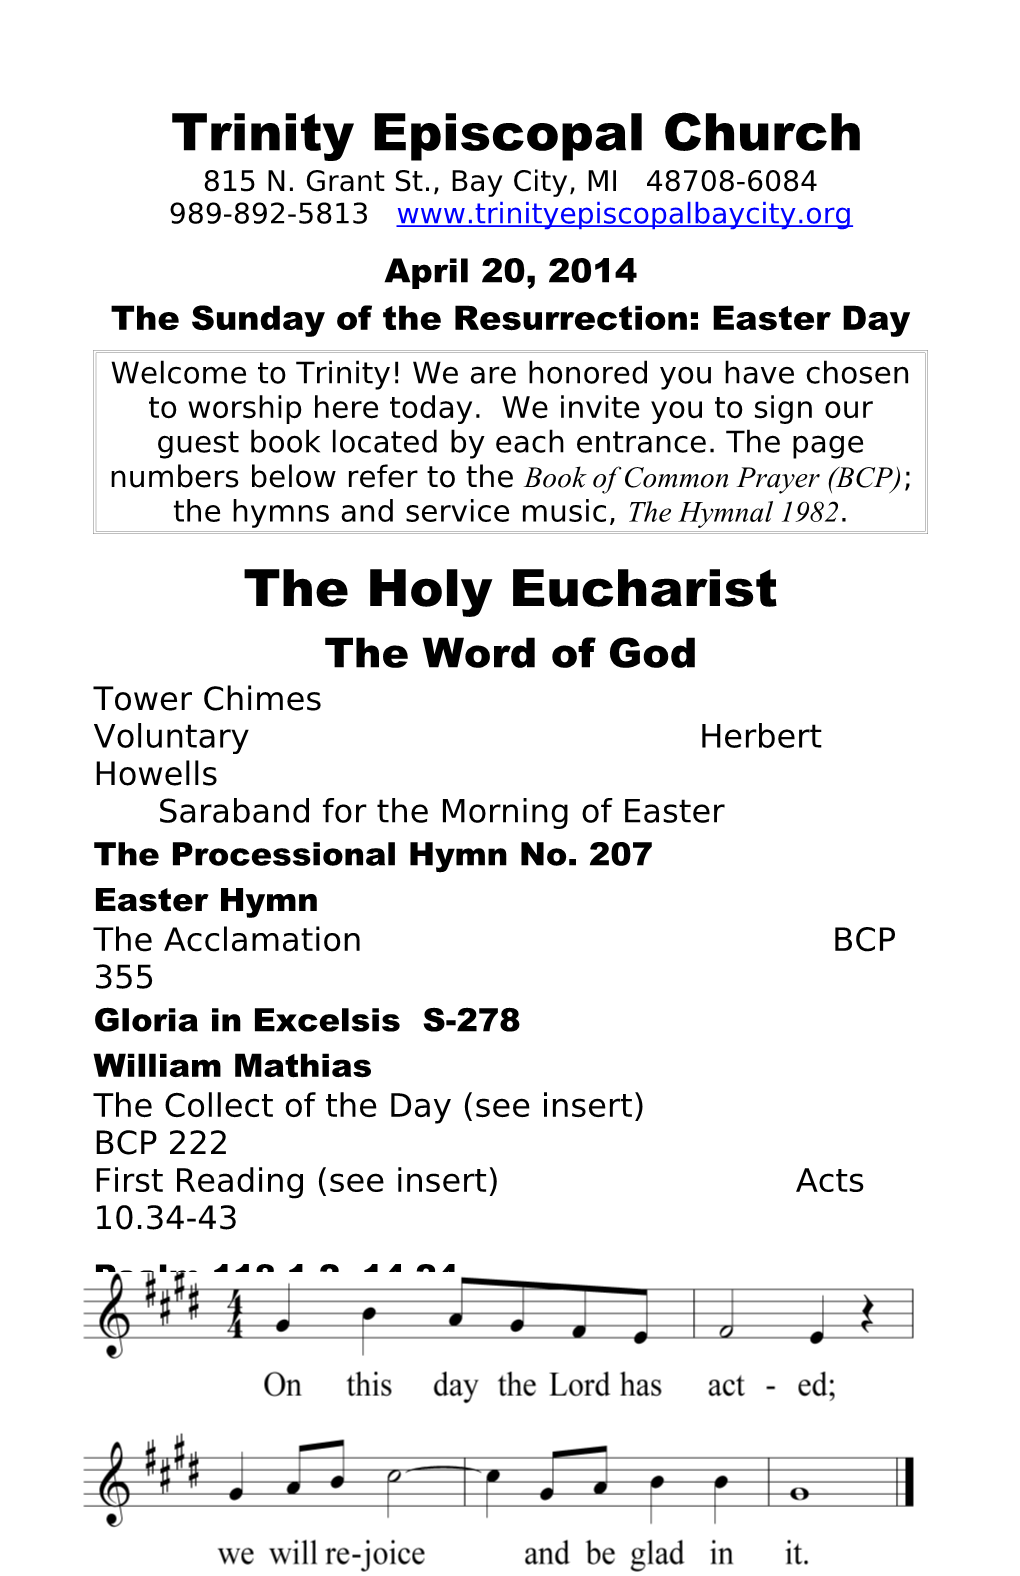 The Sunday of the Resurrection: Easter Day